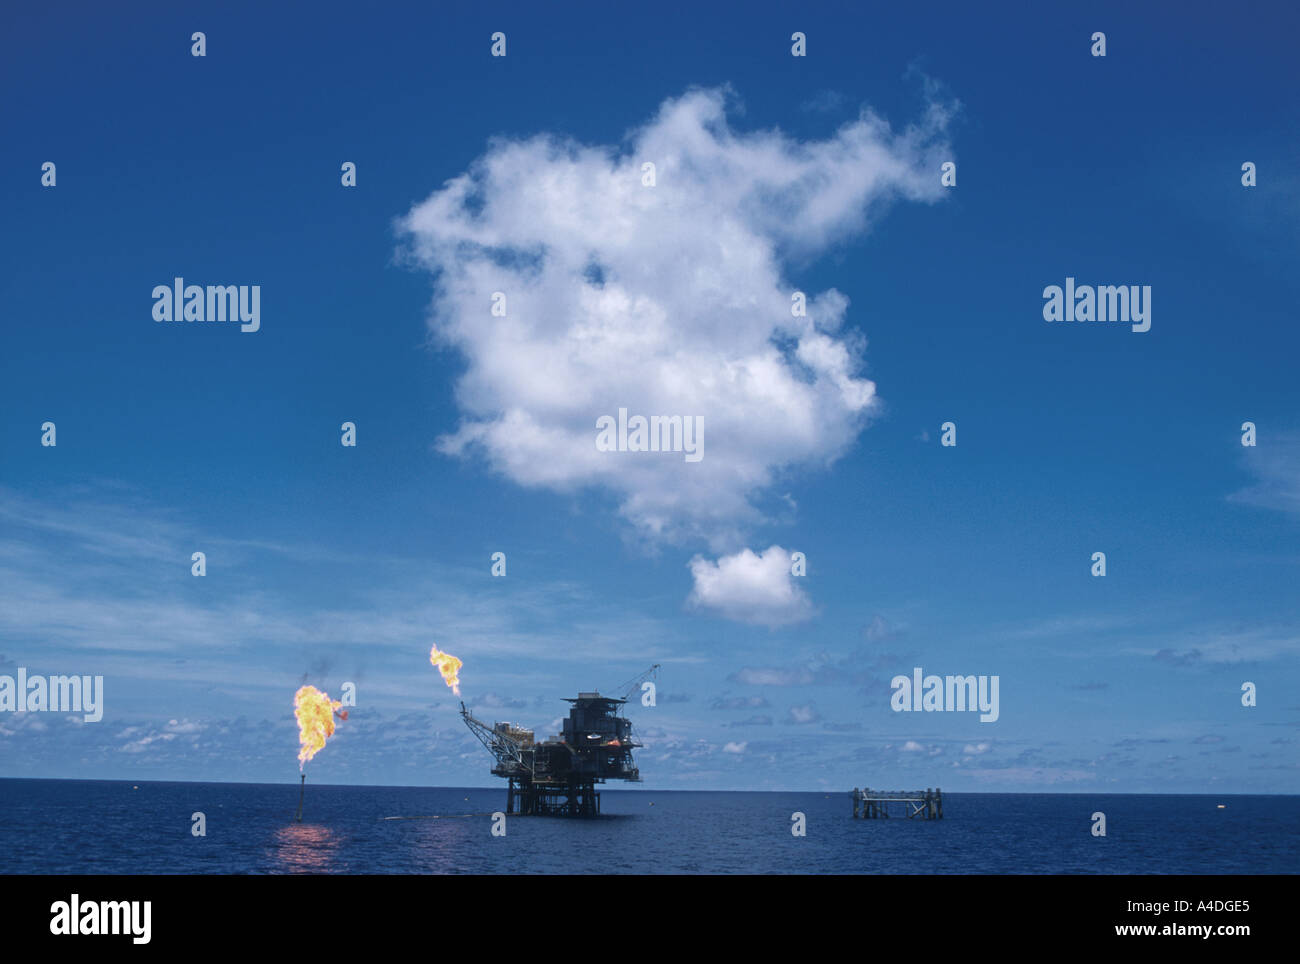 Oil production platforms in the Natuna fields,  South China Sea Stock Photo